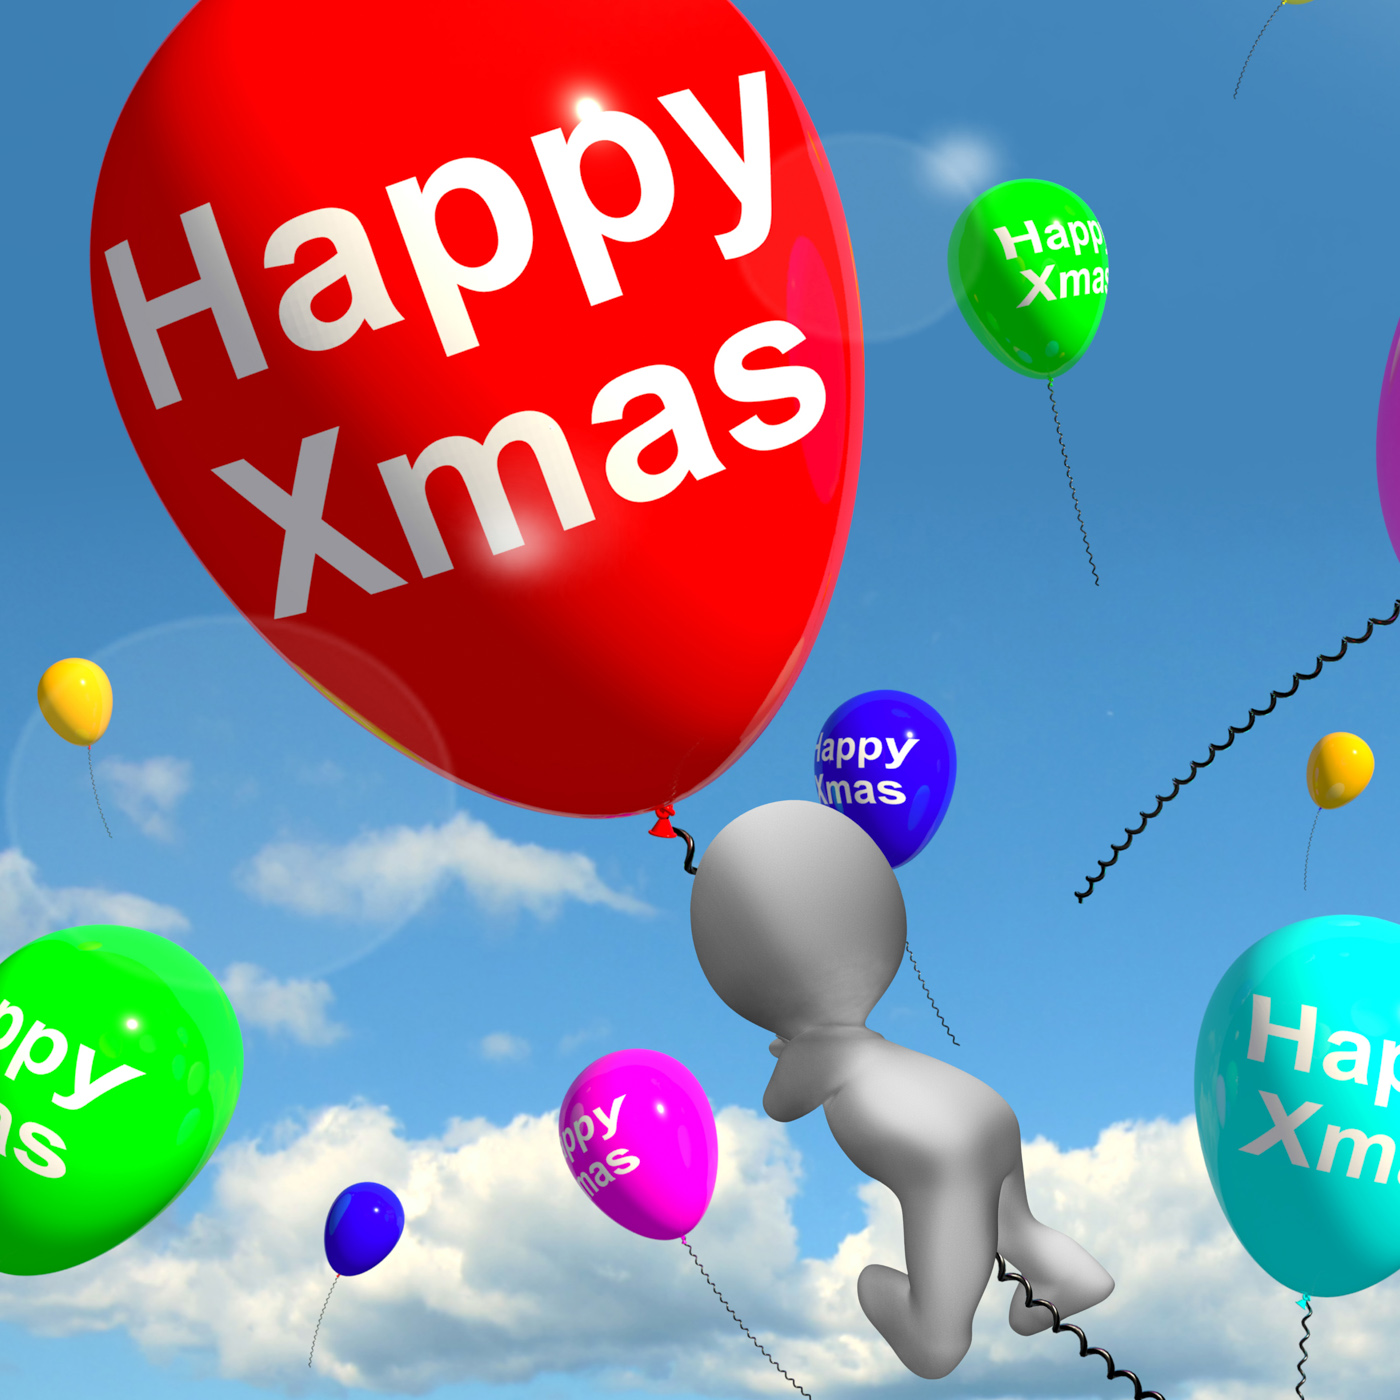 Balloons Floating In The Sky With Happy Xmas Message, Greeting, X-mas, Season, Merrychristmas, HQ Photo